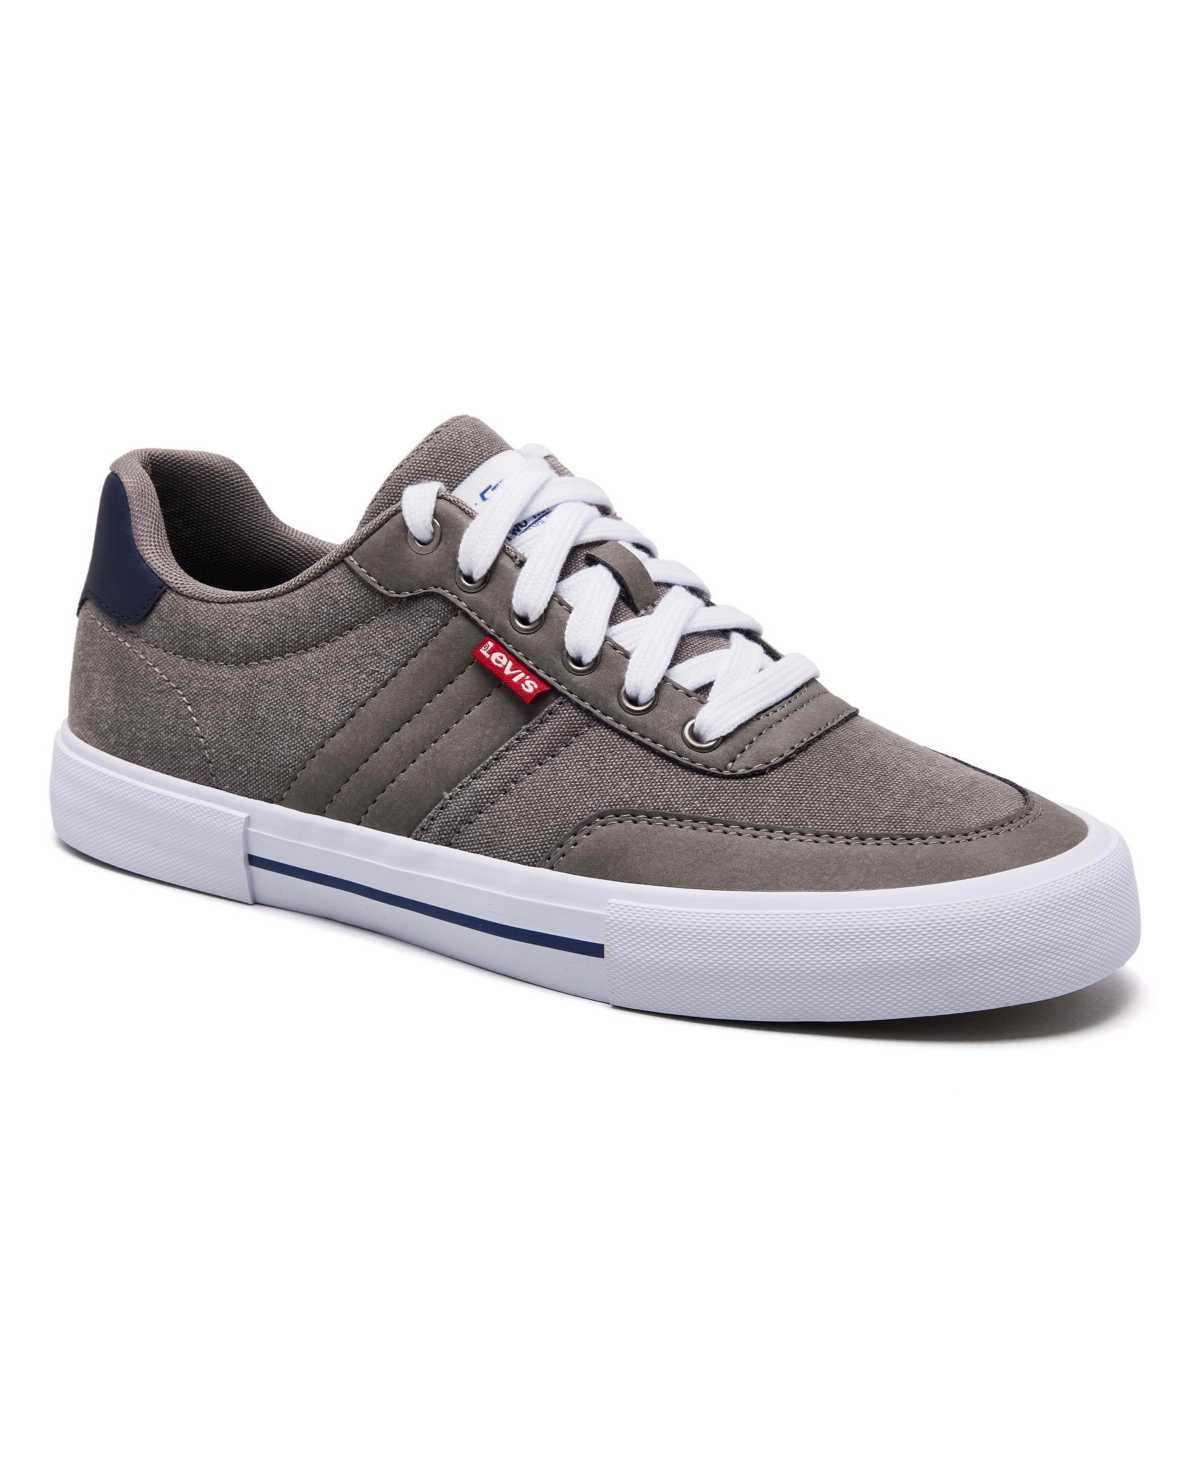 Men's Munro Athletic Lace Up Sneakers - Gray